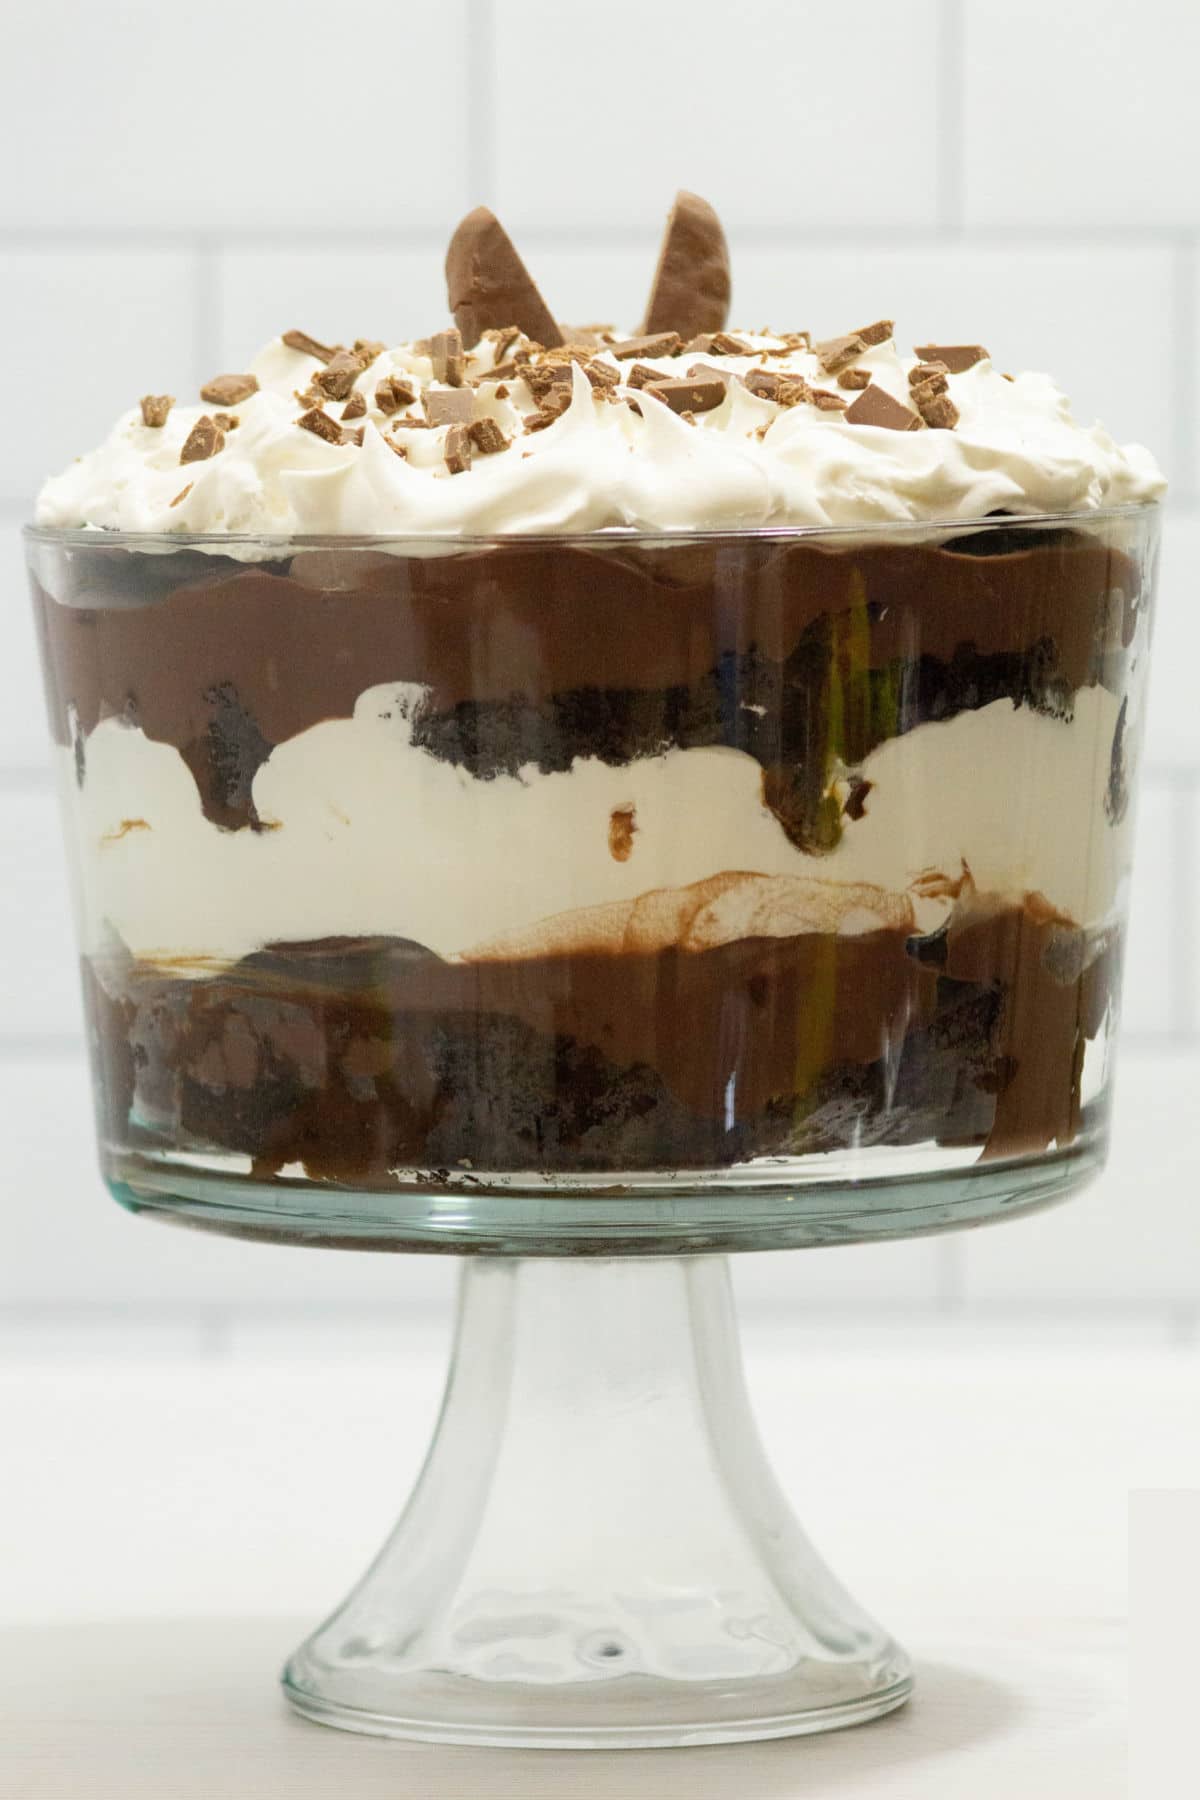 layers of brownie, chocolate pudding and leftover easter candy in a delicious trifle